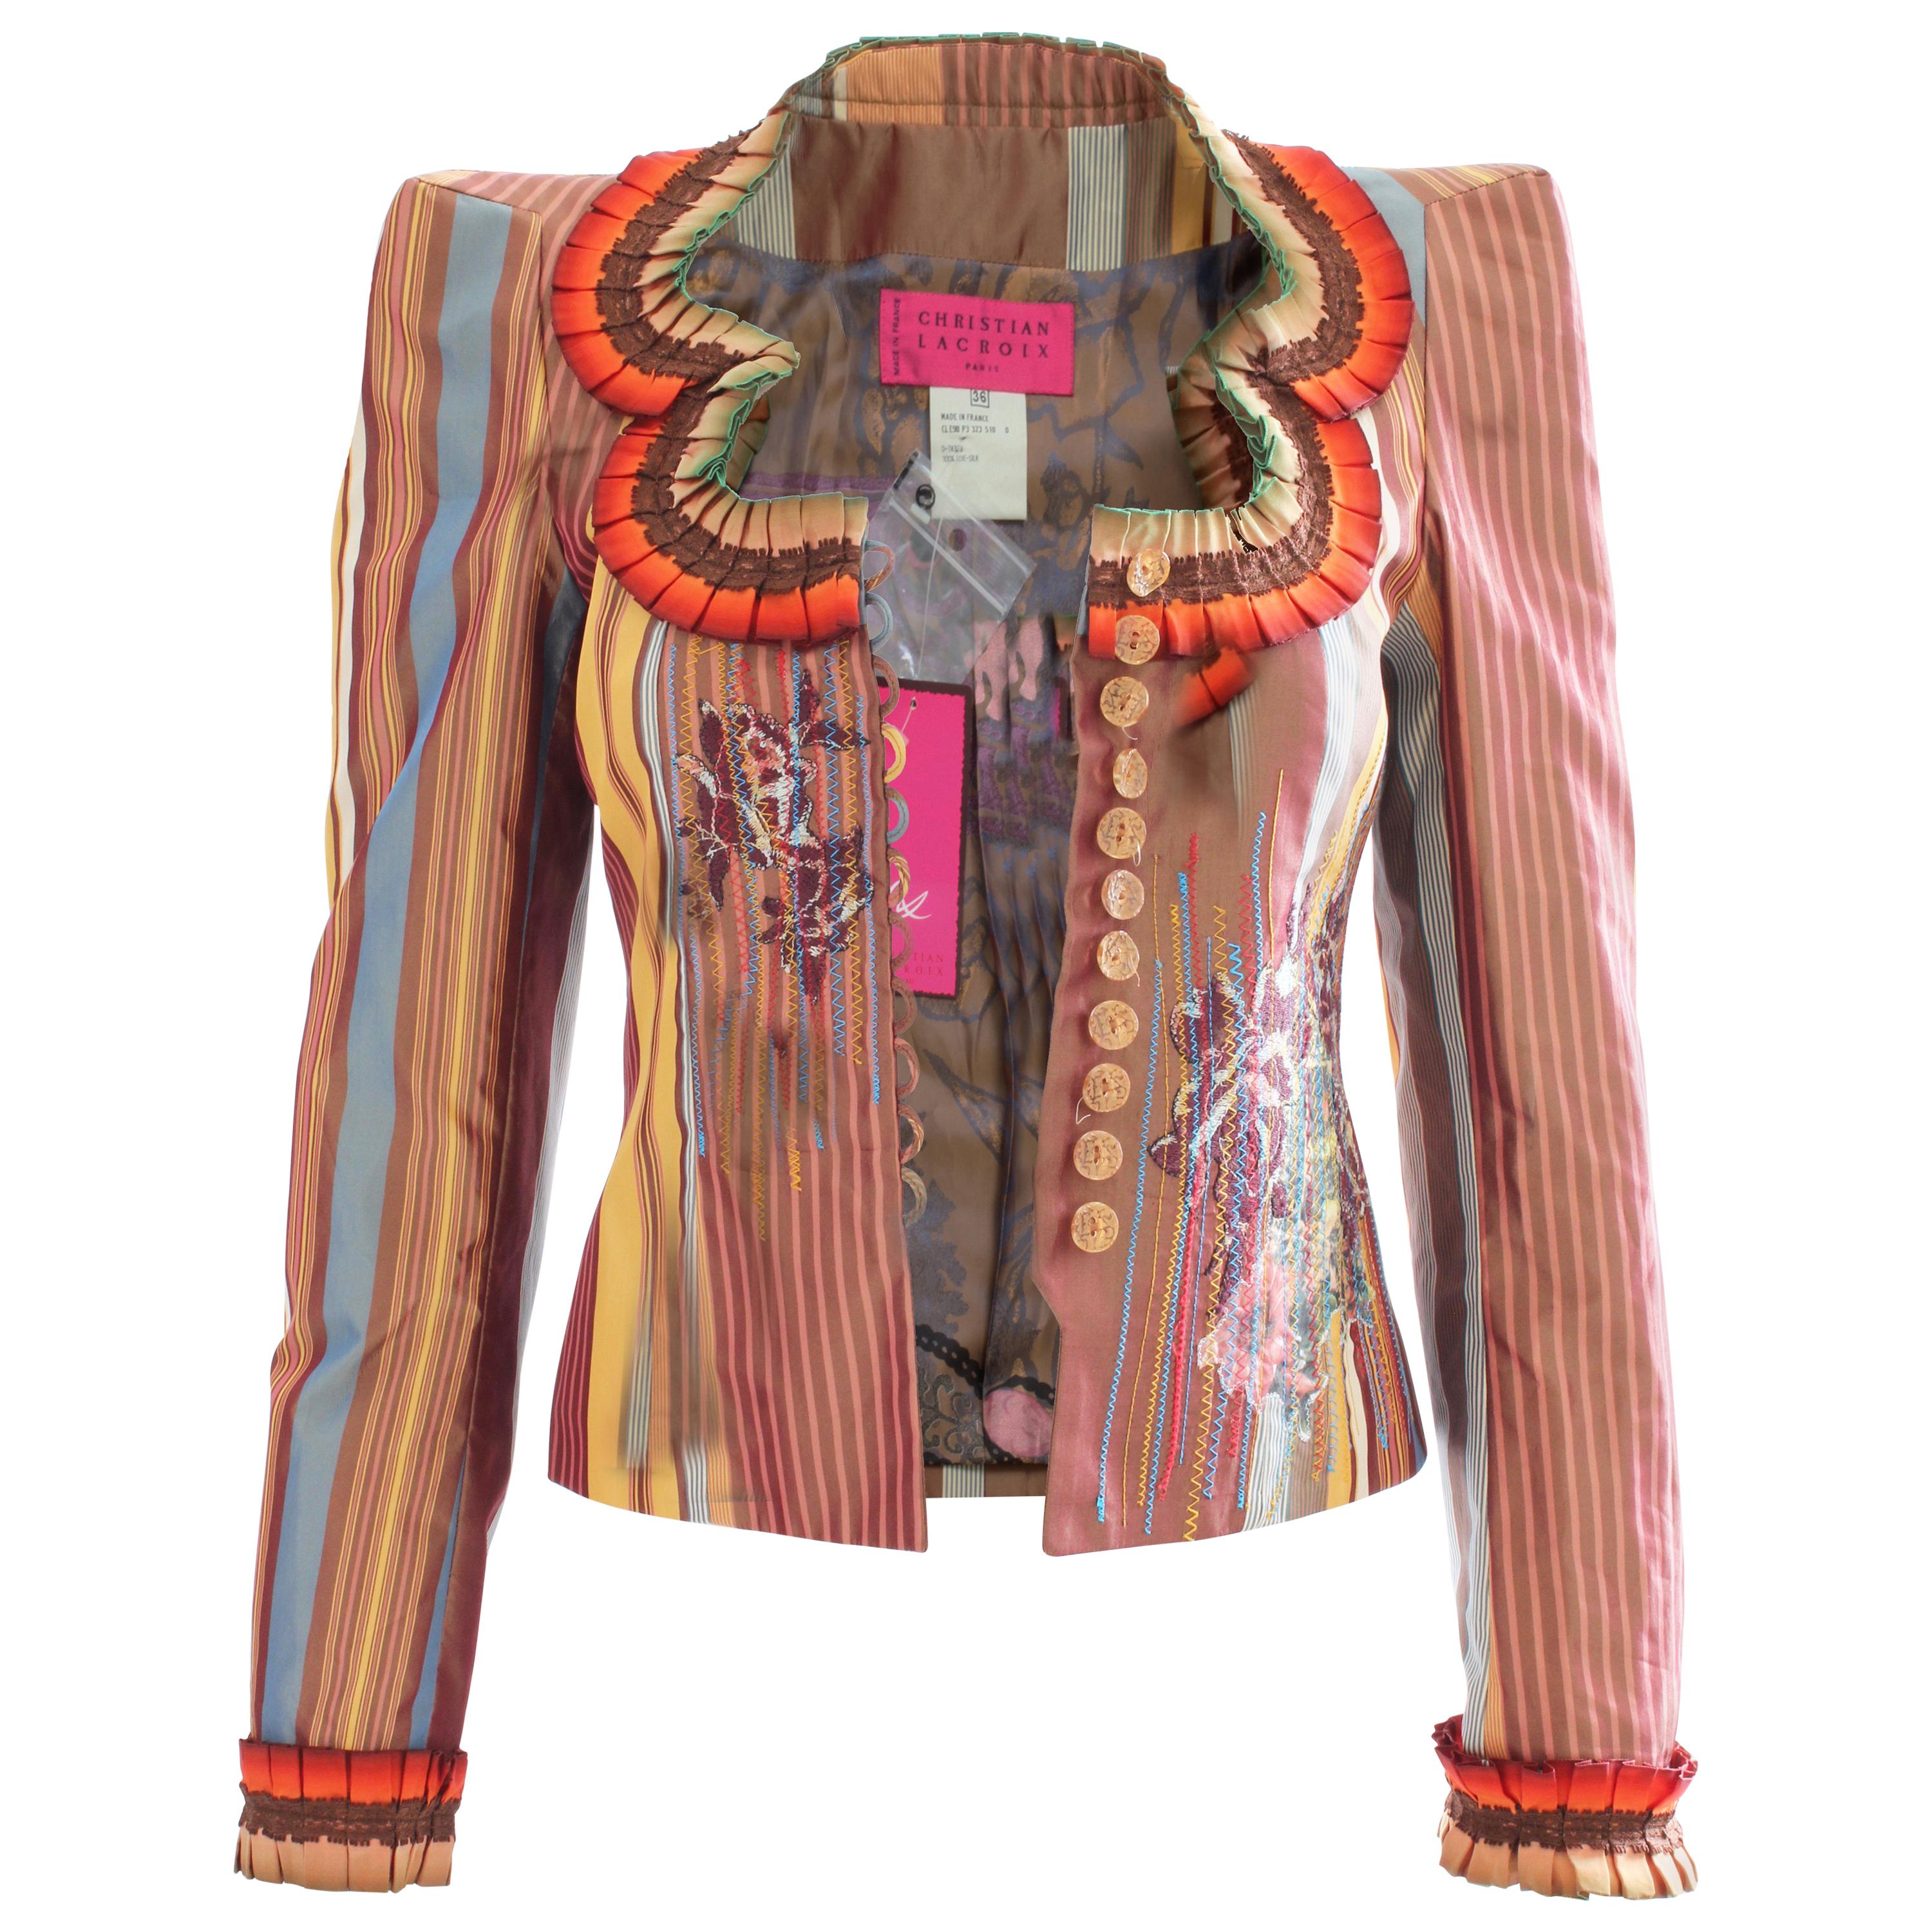 Christian Lacroix Silk Jacket with Stripes, Tapestry + Ruffles New Tags sz36